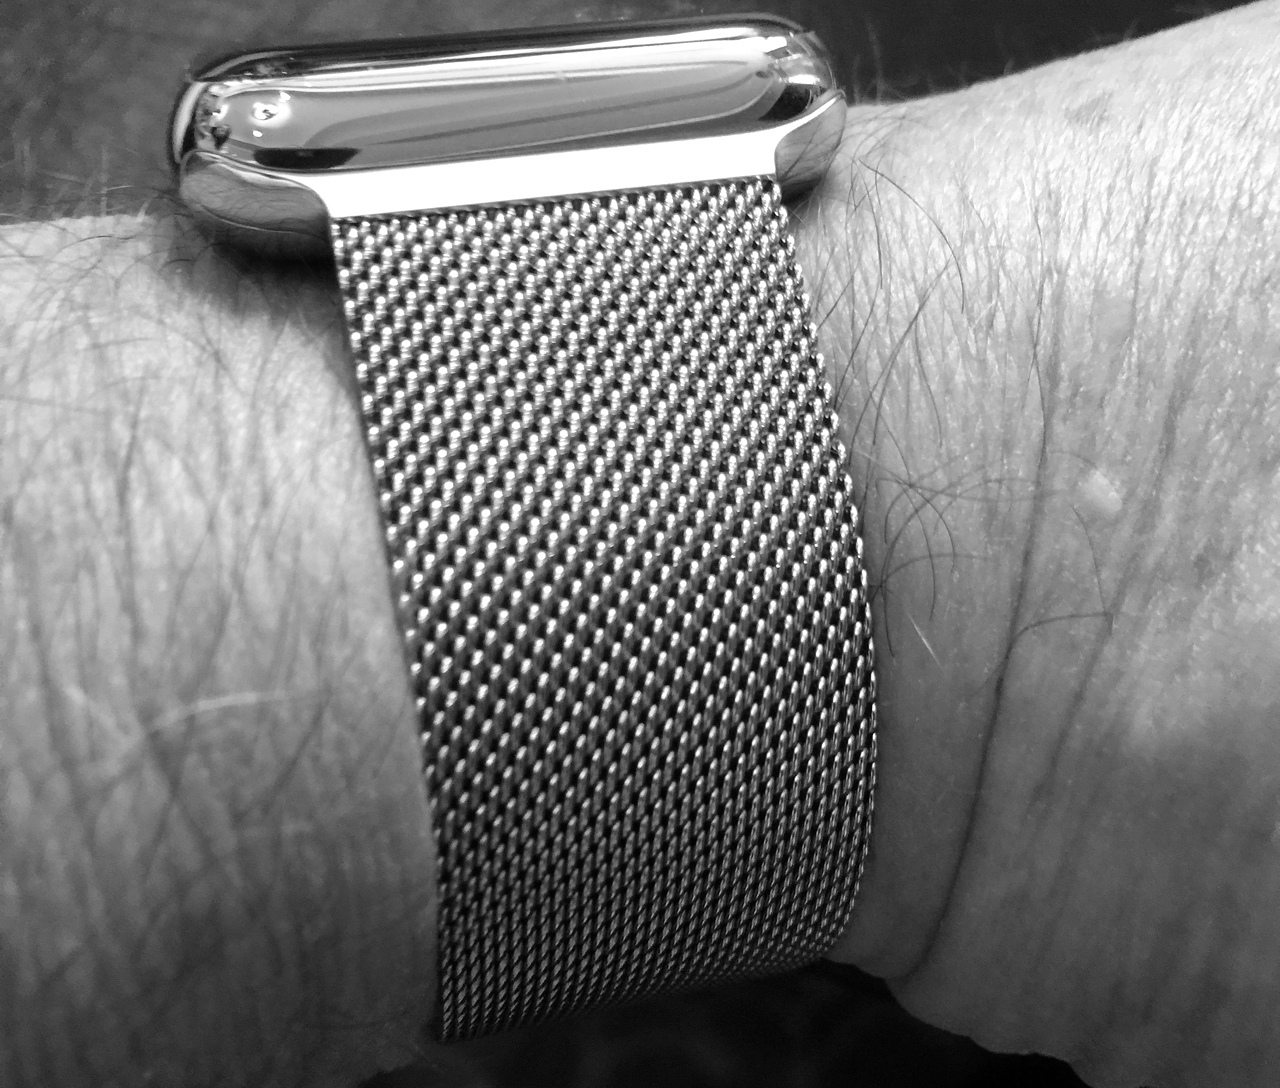 Apple Watch with Milanese Loop